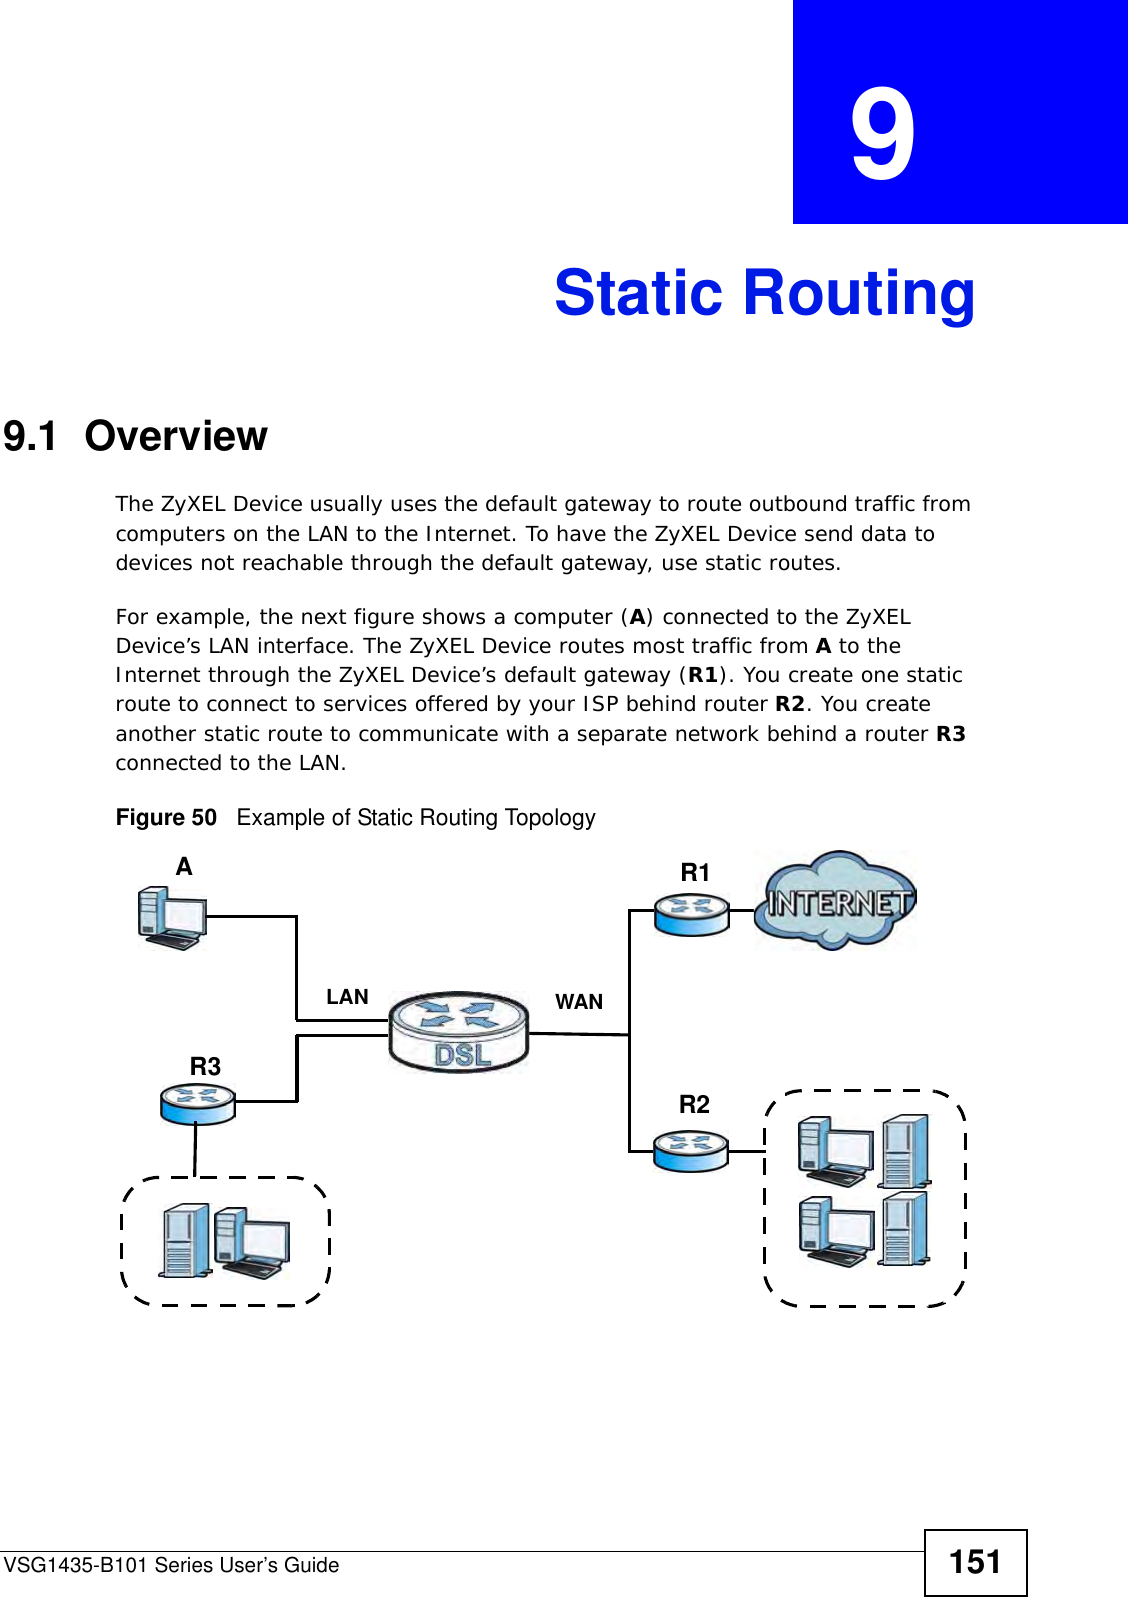 VSG1435-B101 Series User’s Guide 151CHAPTER  9 Static Routing9.1  Overview The ZyXEL Device usually uses the default gateway to route outbound traffic from computers on the LAN to the Internet. To have the ZyXEL Device send data to devices not reachable through the default gateway, use static routes.For example, the next figure shows a computer (A) connected to the ZyXEL Device’s LAN interface. The ZyXEL Device routes most traffic from A to the Internet through the ZyXEL Device’s default gateway (R1). You create one static route to connect to services offered by your ISP behind router R2. You create another static route to communicate with a separate network behind a router R3 connected to the LAN.   Figure 50   Example of Static Routing TopologyWANR1R2AR3LAN